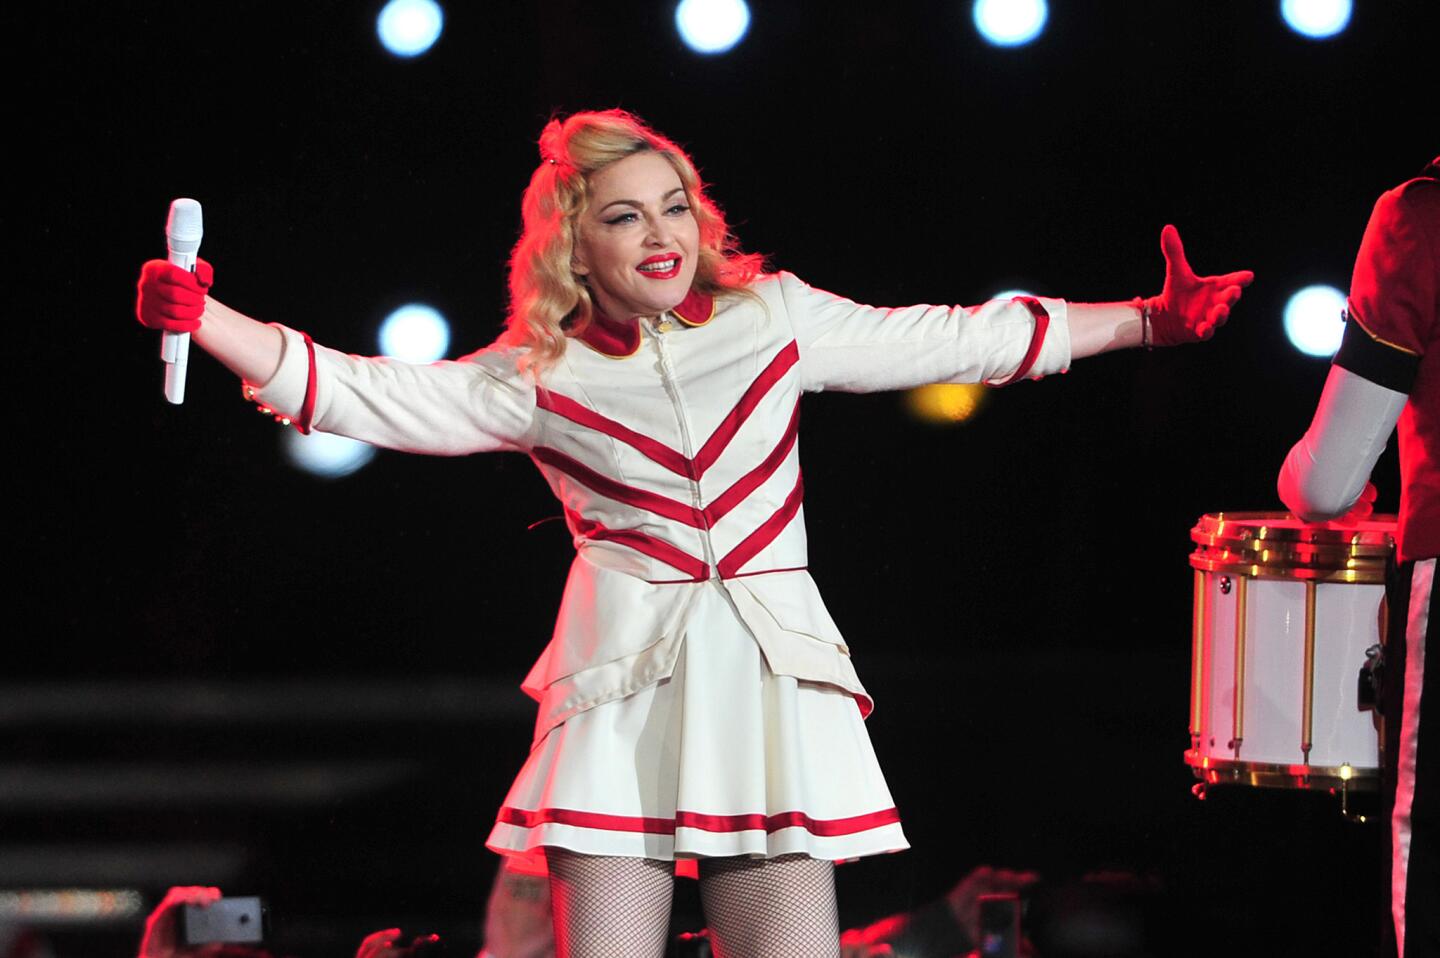 Rumors still surface about whether Madonna lip-synched at the 2012 Super Bowl, according to IBTimes.com.